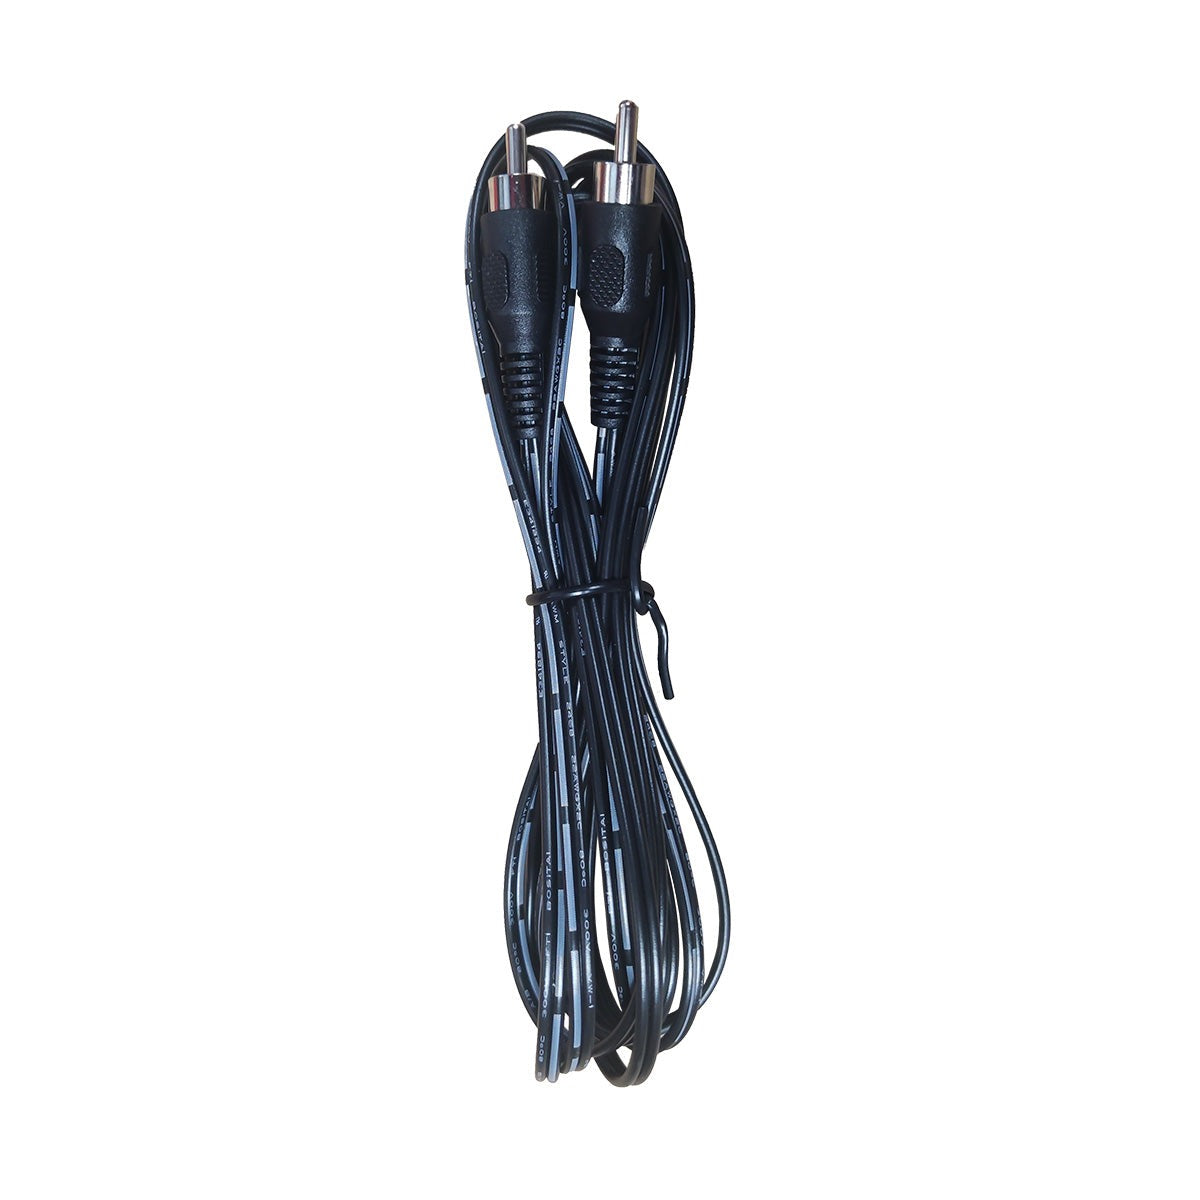 VULKKANO A4/A4 ARC cable 3 meters